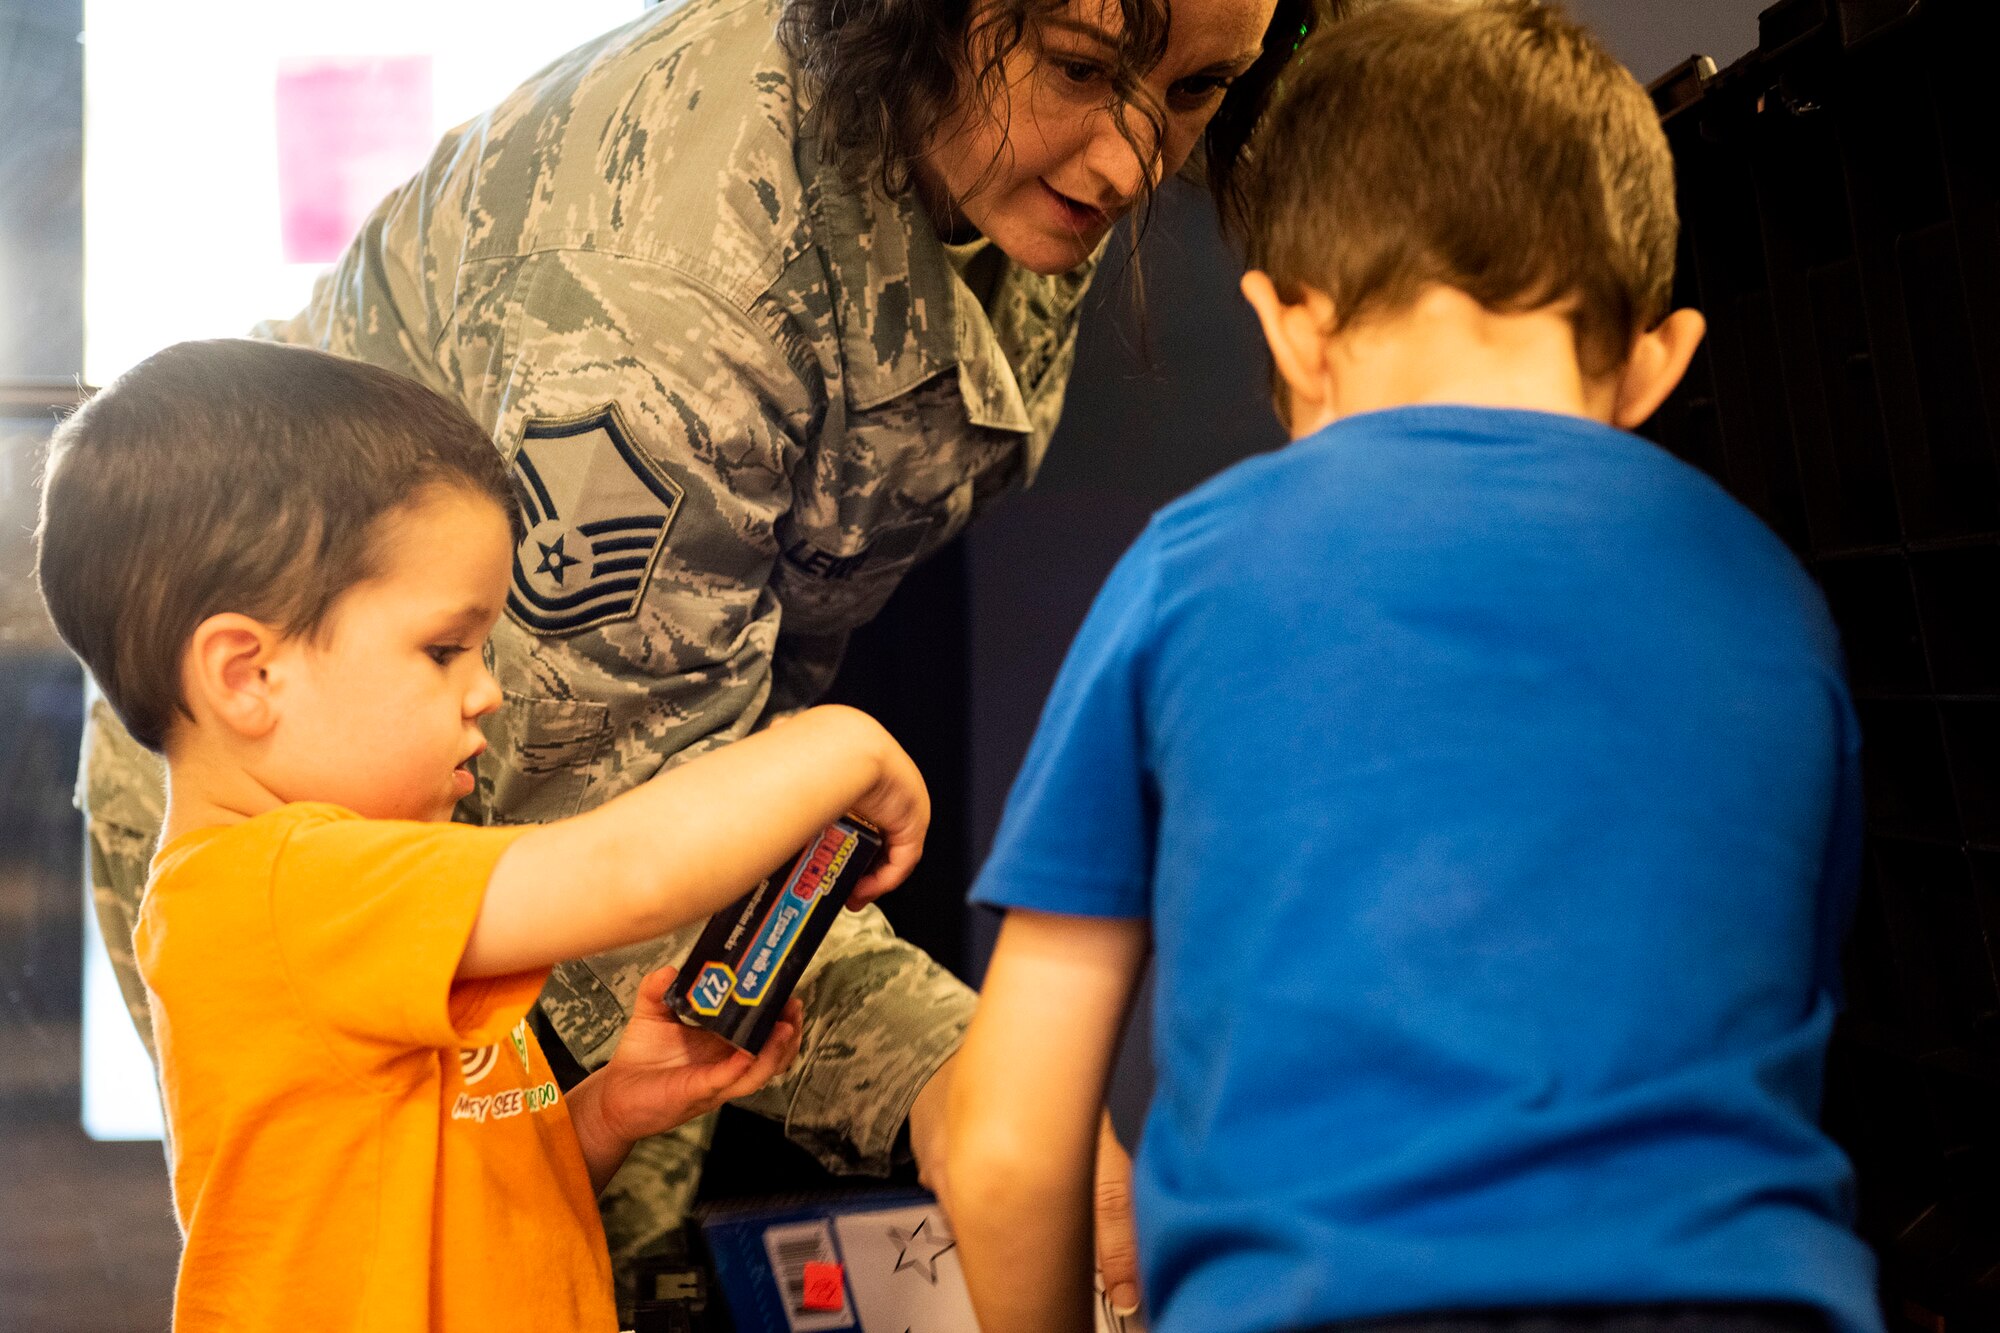 Master Sgt. Amanda Lewis, back, 23d Force Support Squadron NCO in charge of readiness, helps Max, left, and Luke, sons of Laura Barthle, military spouse, pick out toys during a Deployed Spouses Dinner Sept. 17, 2019, at Moody Air Force Base, Ga. The monthly event is a free dinner at Georgia Pines Dining Facility designed as a ‘thank you’ for each families’ support and sacrifice. The dinner, occurring on every third Tuesday of the month, provides an opportunity for spouses to interact with other families of deployed Airmen, key spouses and unit leadership, as well as provide a break for the spouse while military sponsor is deployed. The next Deployed Spouses Dinner will be Oct. 15. (U.S. Air Force photo by Senior Airman Erick Requadt)